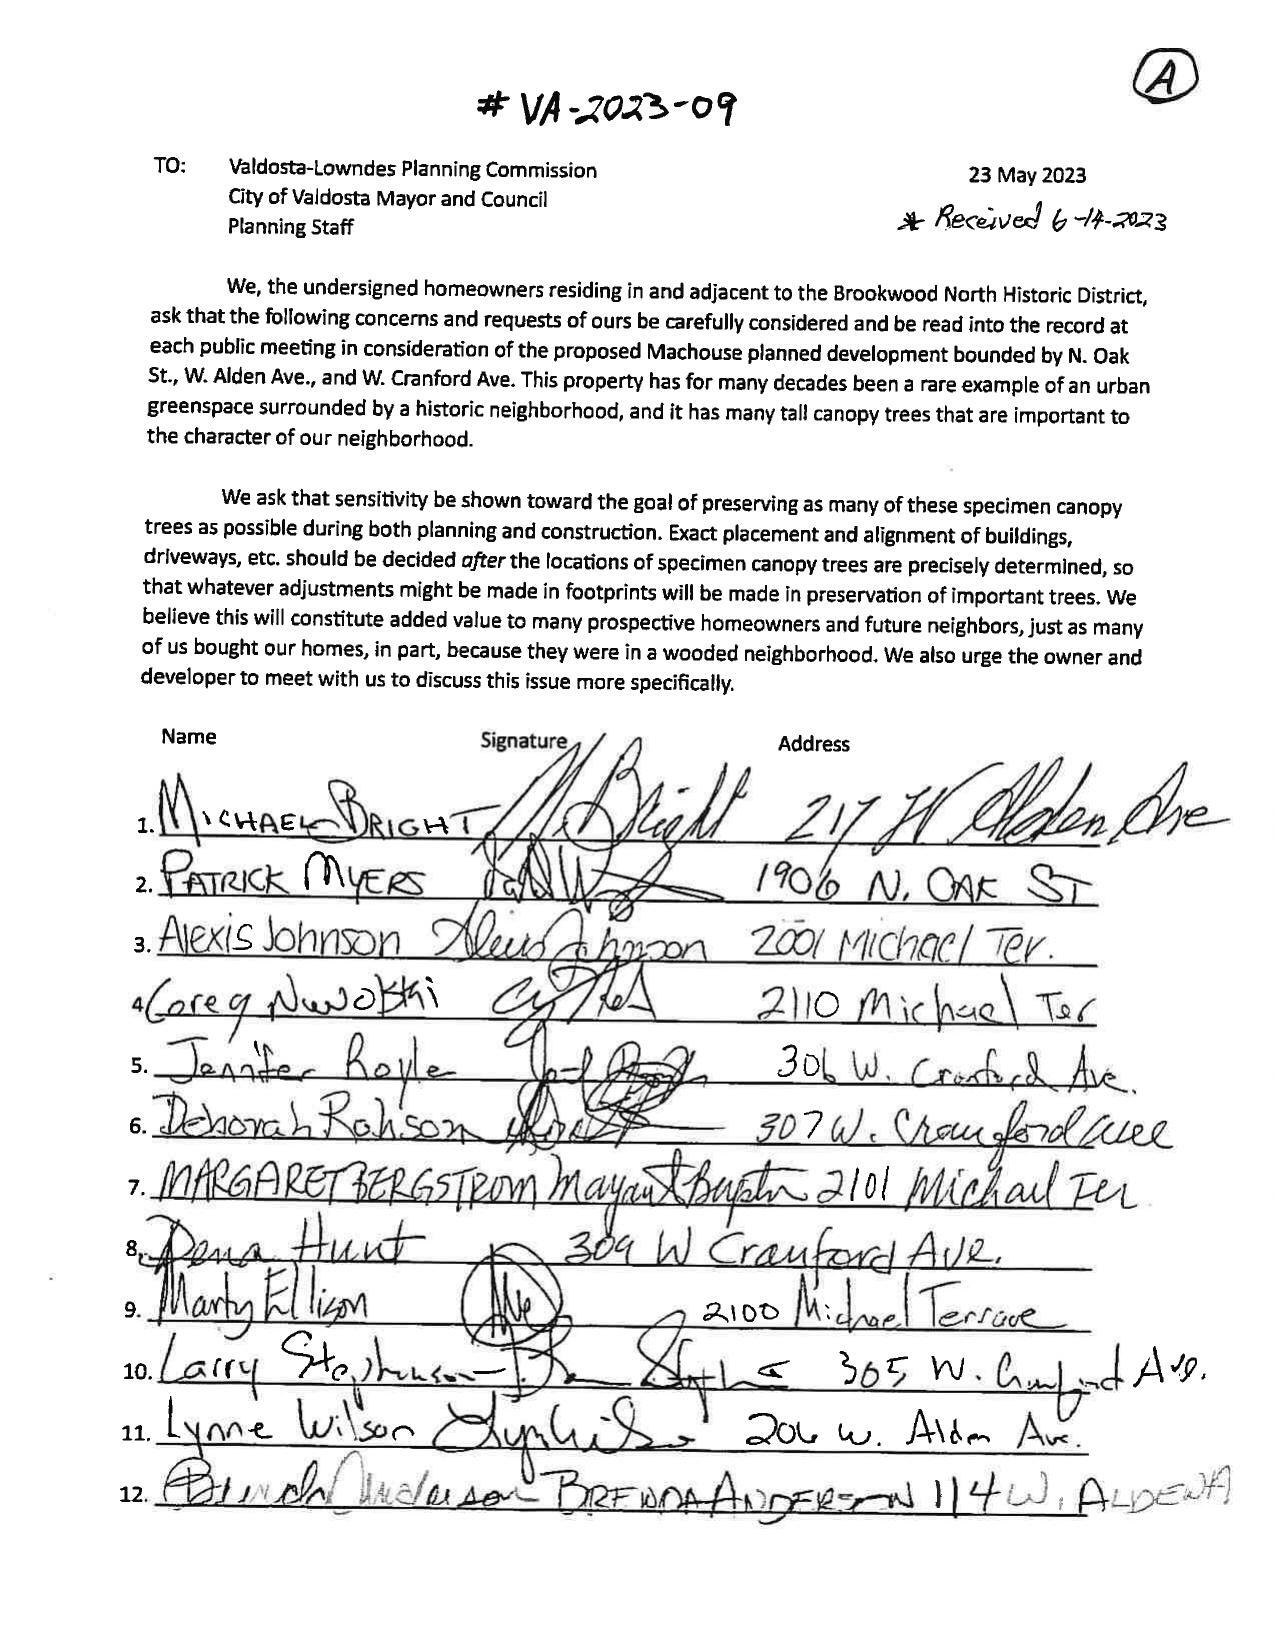 Petition of concerns about Brookwood North District (1 of 2)